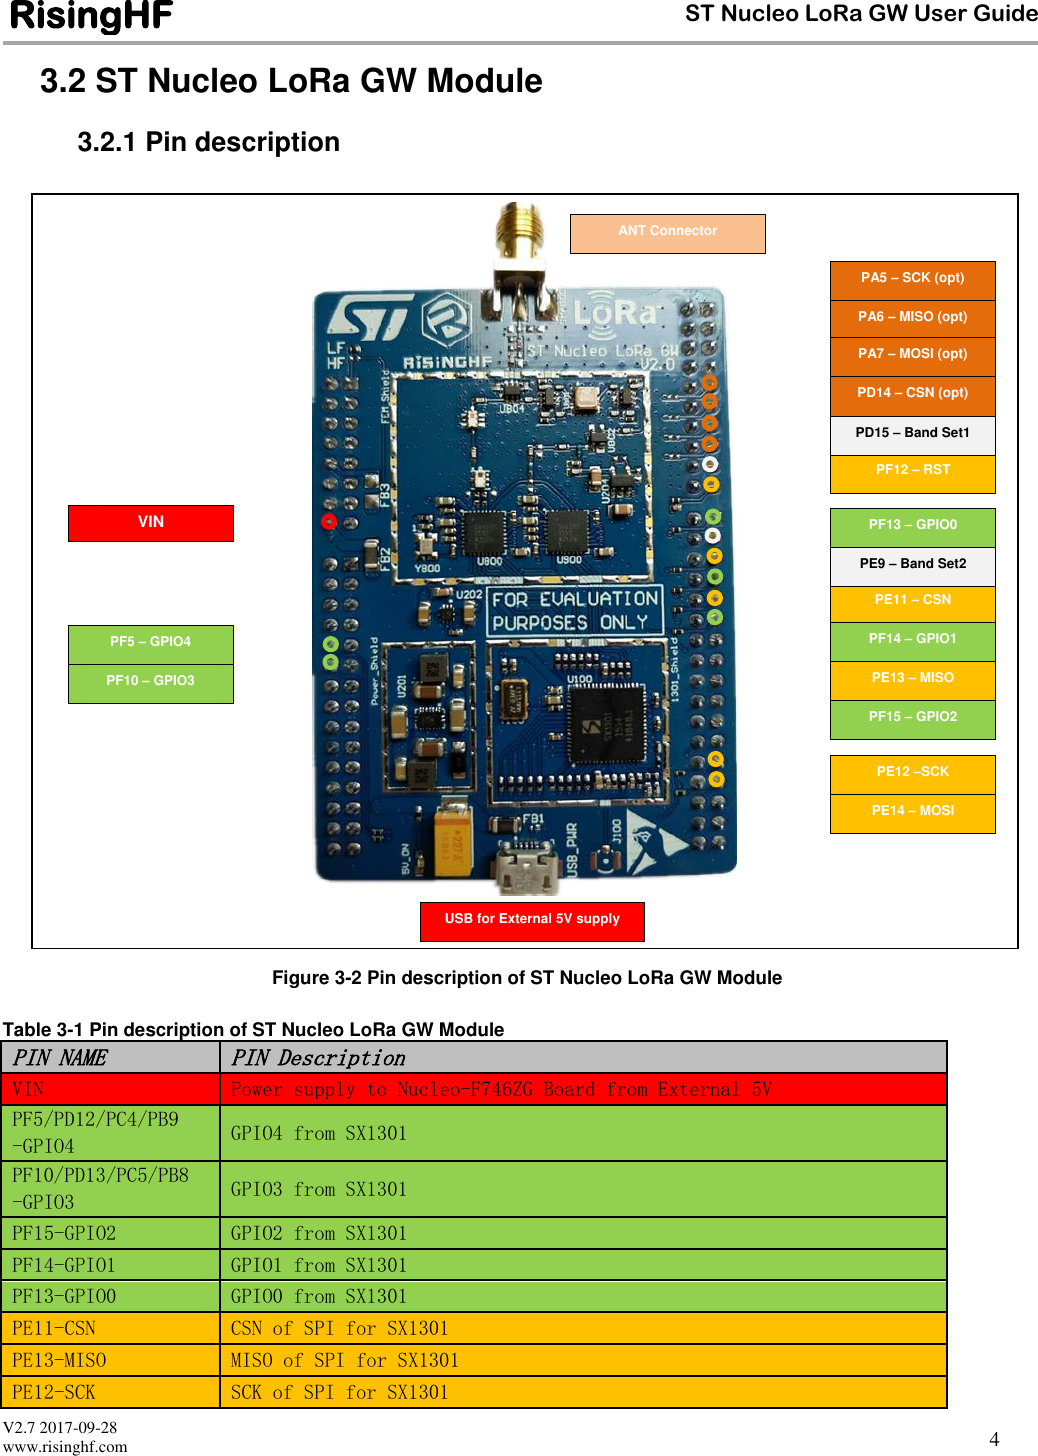  V2.7 2017-09-28 www.risinghf.com ST Nucleo LoRa GW User Guide RisingHF  4 3.2 ST Nucleo LoRa GW Module 3.2.1 Pin description                             Figure 3-2 Pin description of ST Nucleo LoRa GW Module  Table 3-1 Pin description of ST Nucleo LoRa GW Module PIN NAME PIN Description VIN Power supply to Nucleo-F746ZG Board from External 5V PF5/PD12/PC4/PB9 -GPIO4 GPIO4 from SX1301 PF10/PD13/PC5/PB8 -GPIO3 GPIO3 from SX1301 PF15-GPIO2 GPIO2 from SX1301 PF14-GPIO1 GPIO1 from SX1301 PF13-GPIO0 GPIO0 from SX1301 PE11-CSN CSN of SPI for SX1301 PE13-MISO MISO of SPI for SX1301 PE12-SCK SCK of SPI for SX1301  VIN PE12 –SCK PE14 – MOSI PF12 – RST ANT Connector USB for External 5V supply PA5 – SCK (opt) PA6 – MISO (opt) PA7 – MOSI (opt) PD14 – CSN (opt) PF5 – GPIO4 PF10 – GPIO3 PD15 – Band Set1 PF15 – GPIO2 PF13 – GPIO0 PF14 – GPIO1 PE13 – MISO PE11 – CSN PE9 – Band Set2 